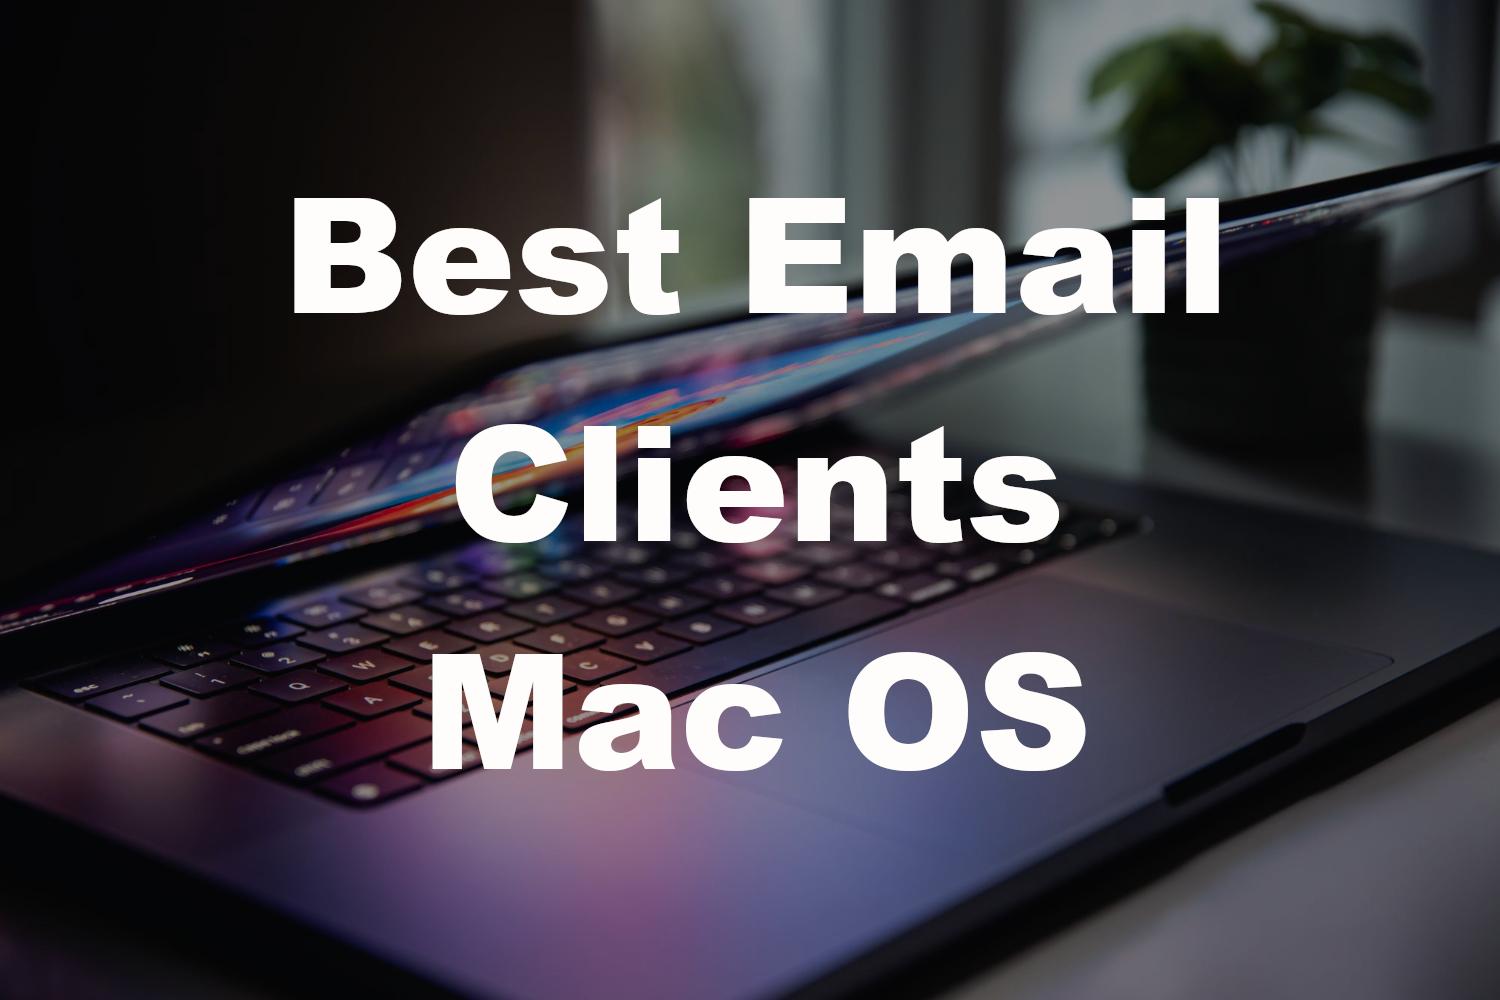 The Best Email Clients for Mac OS in 2023